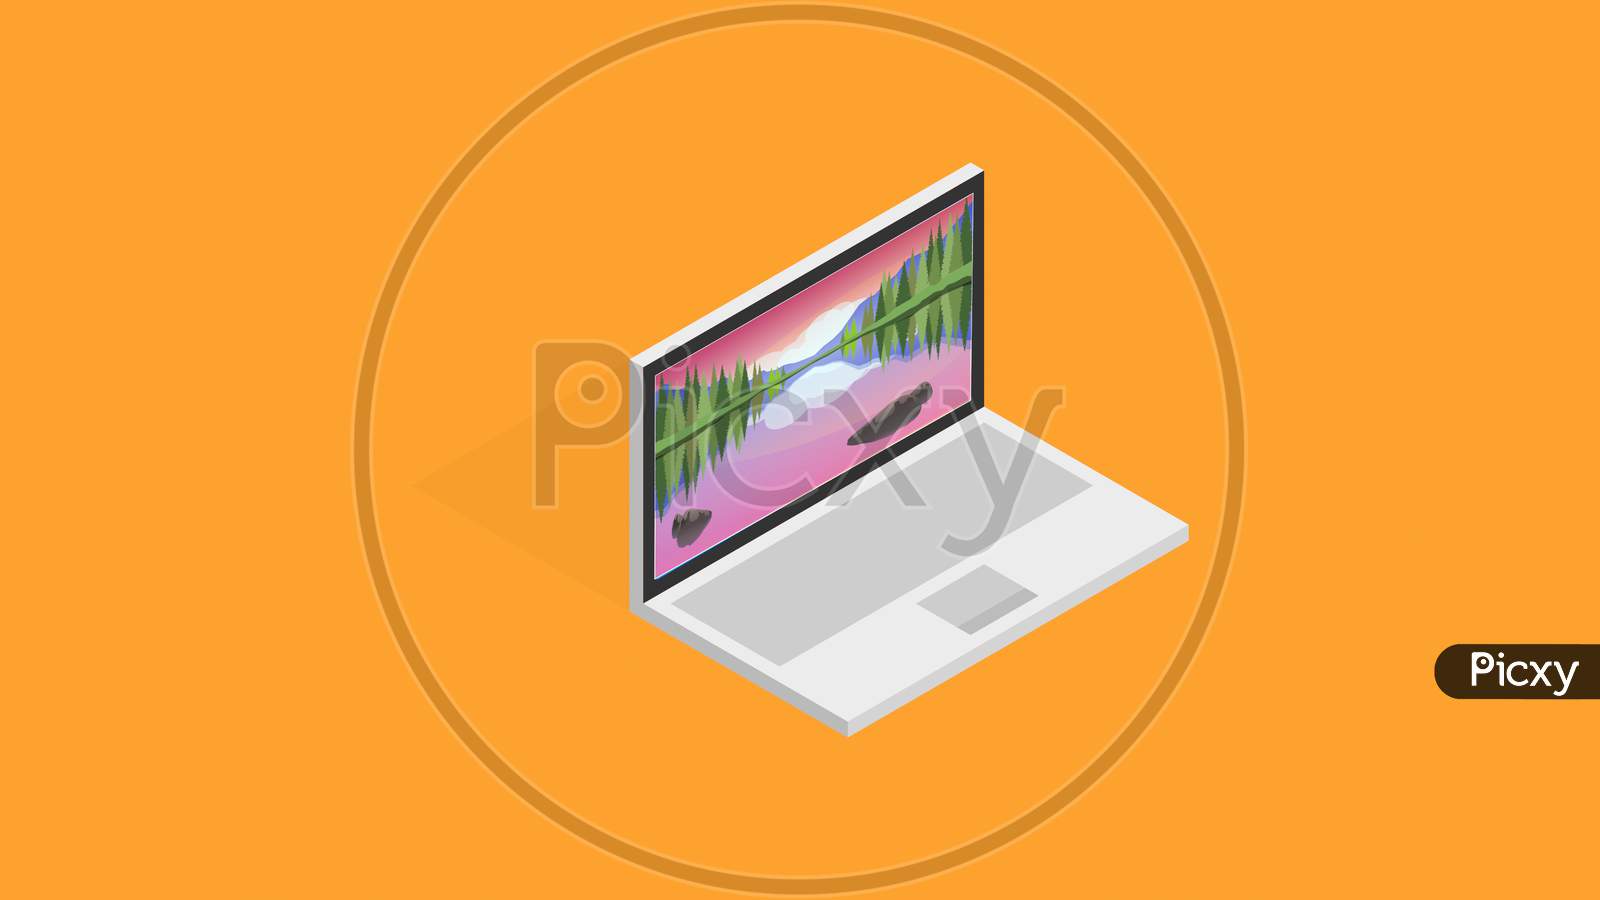 3D Illustration Graphic Of A Laptop With Beautiful Landscape Scene On The Display, Isolated On Yellow Background.